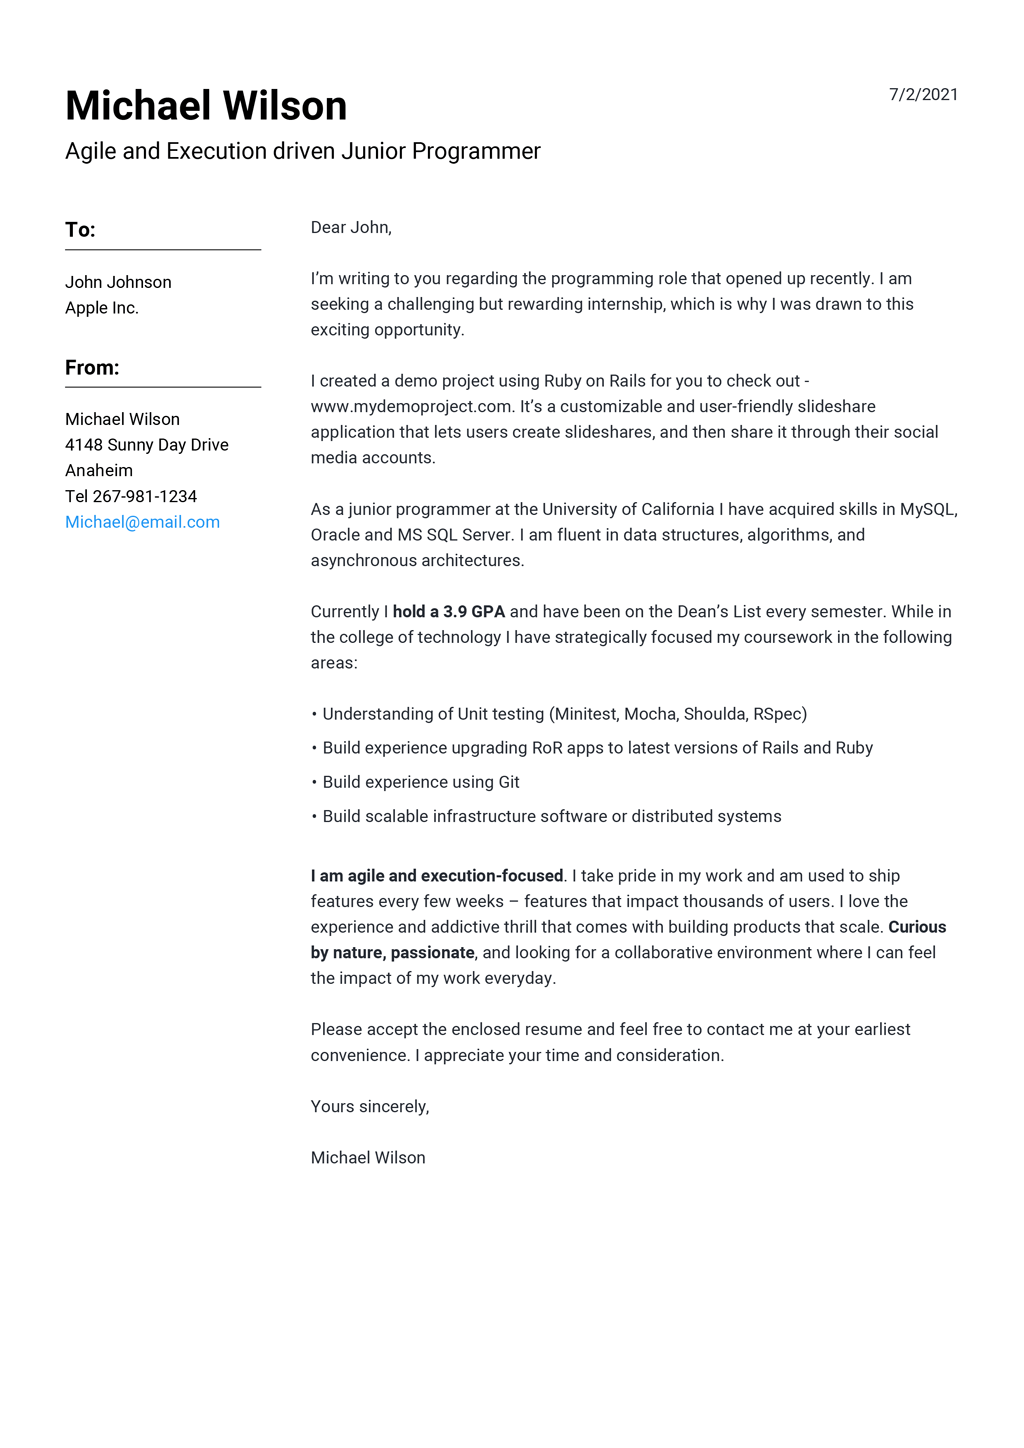 Basic Cover Letter Template Free from jofibo.com